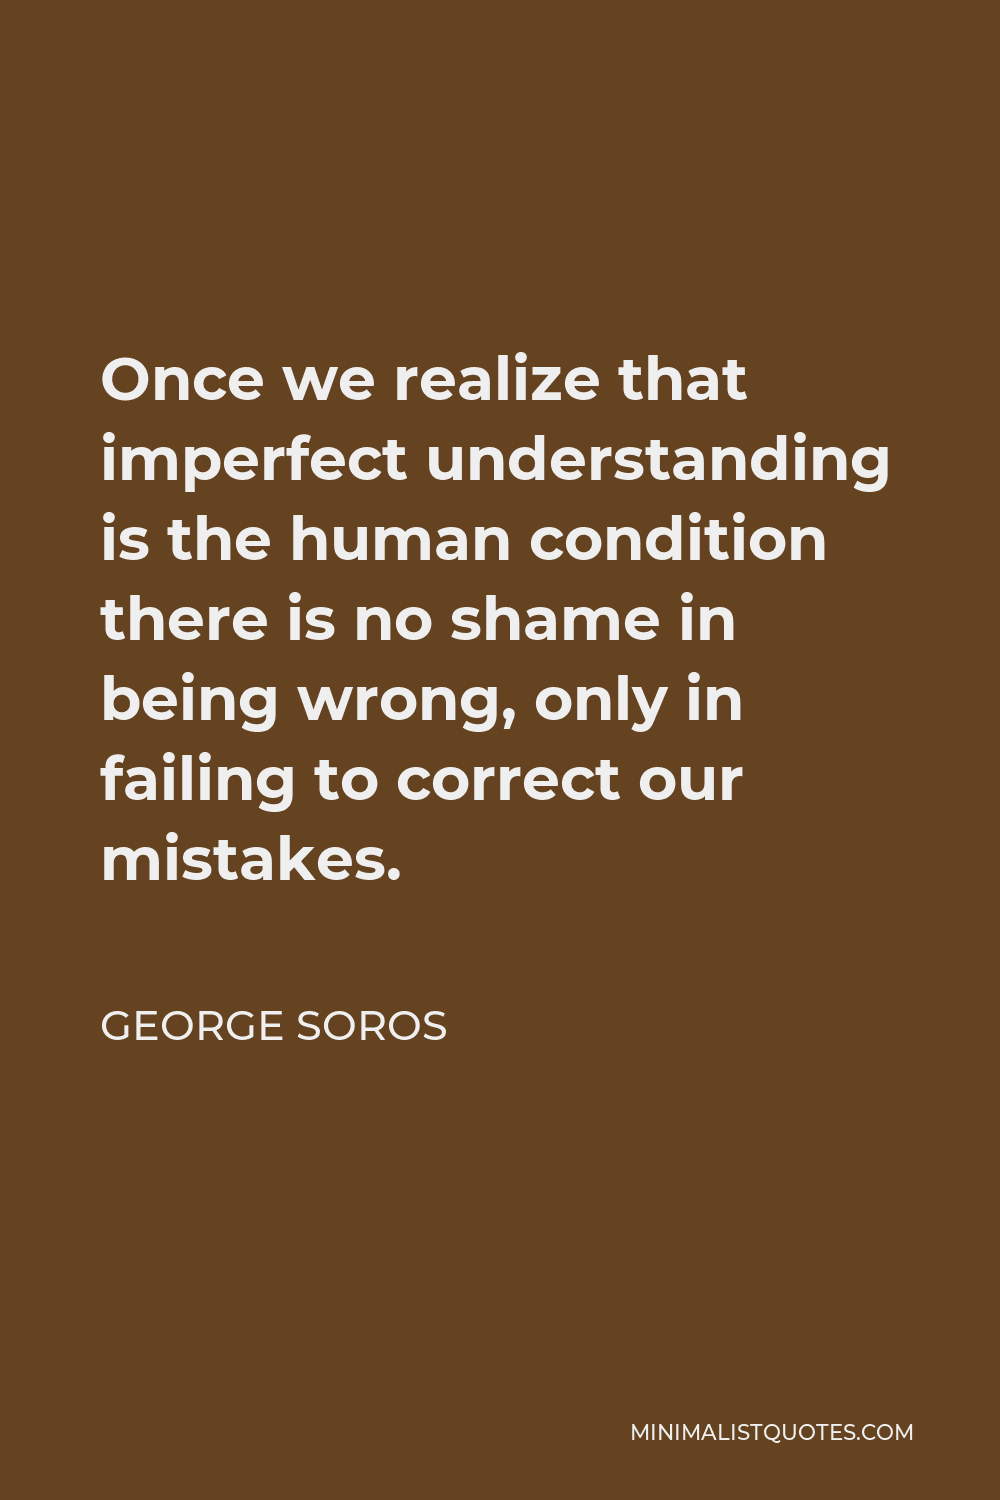 George Soros Quote - Once we realize that imperfect understanding is the human condition there is no shame in being wrong, only in failing to correct our mistakes.